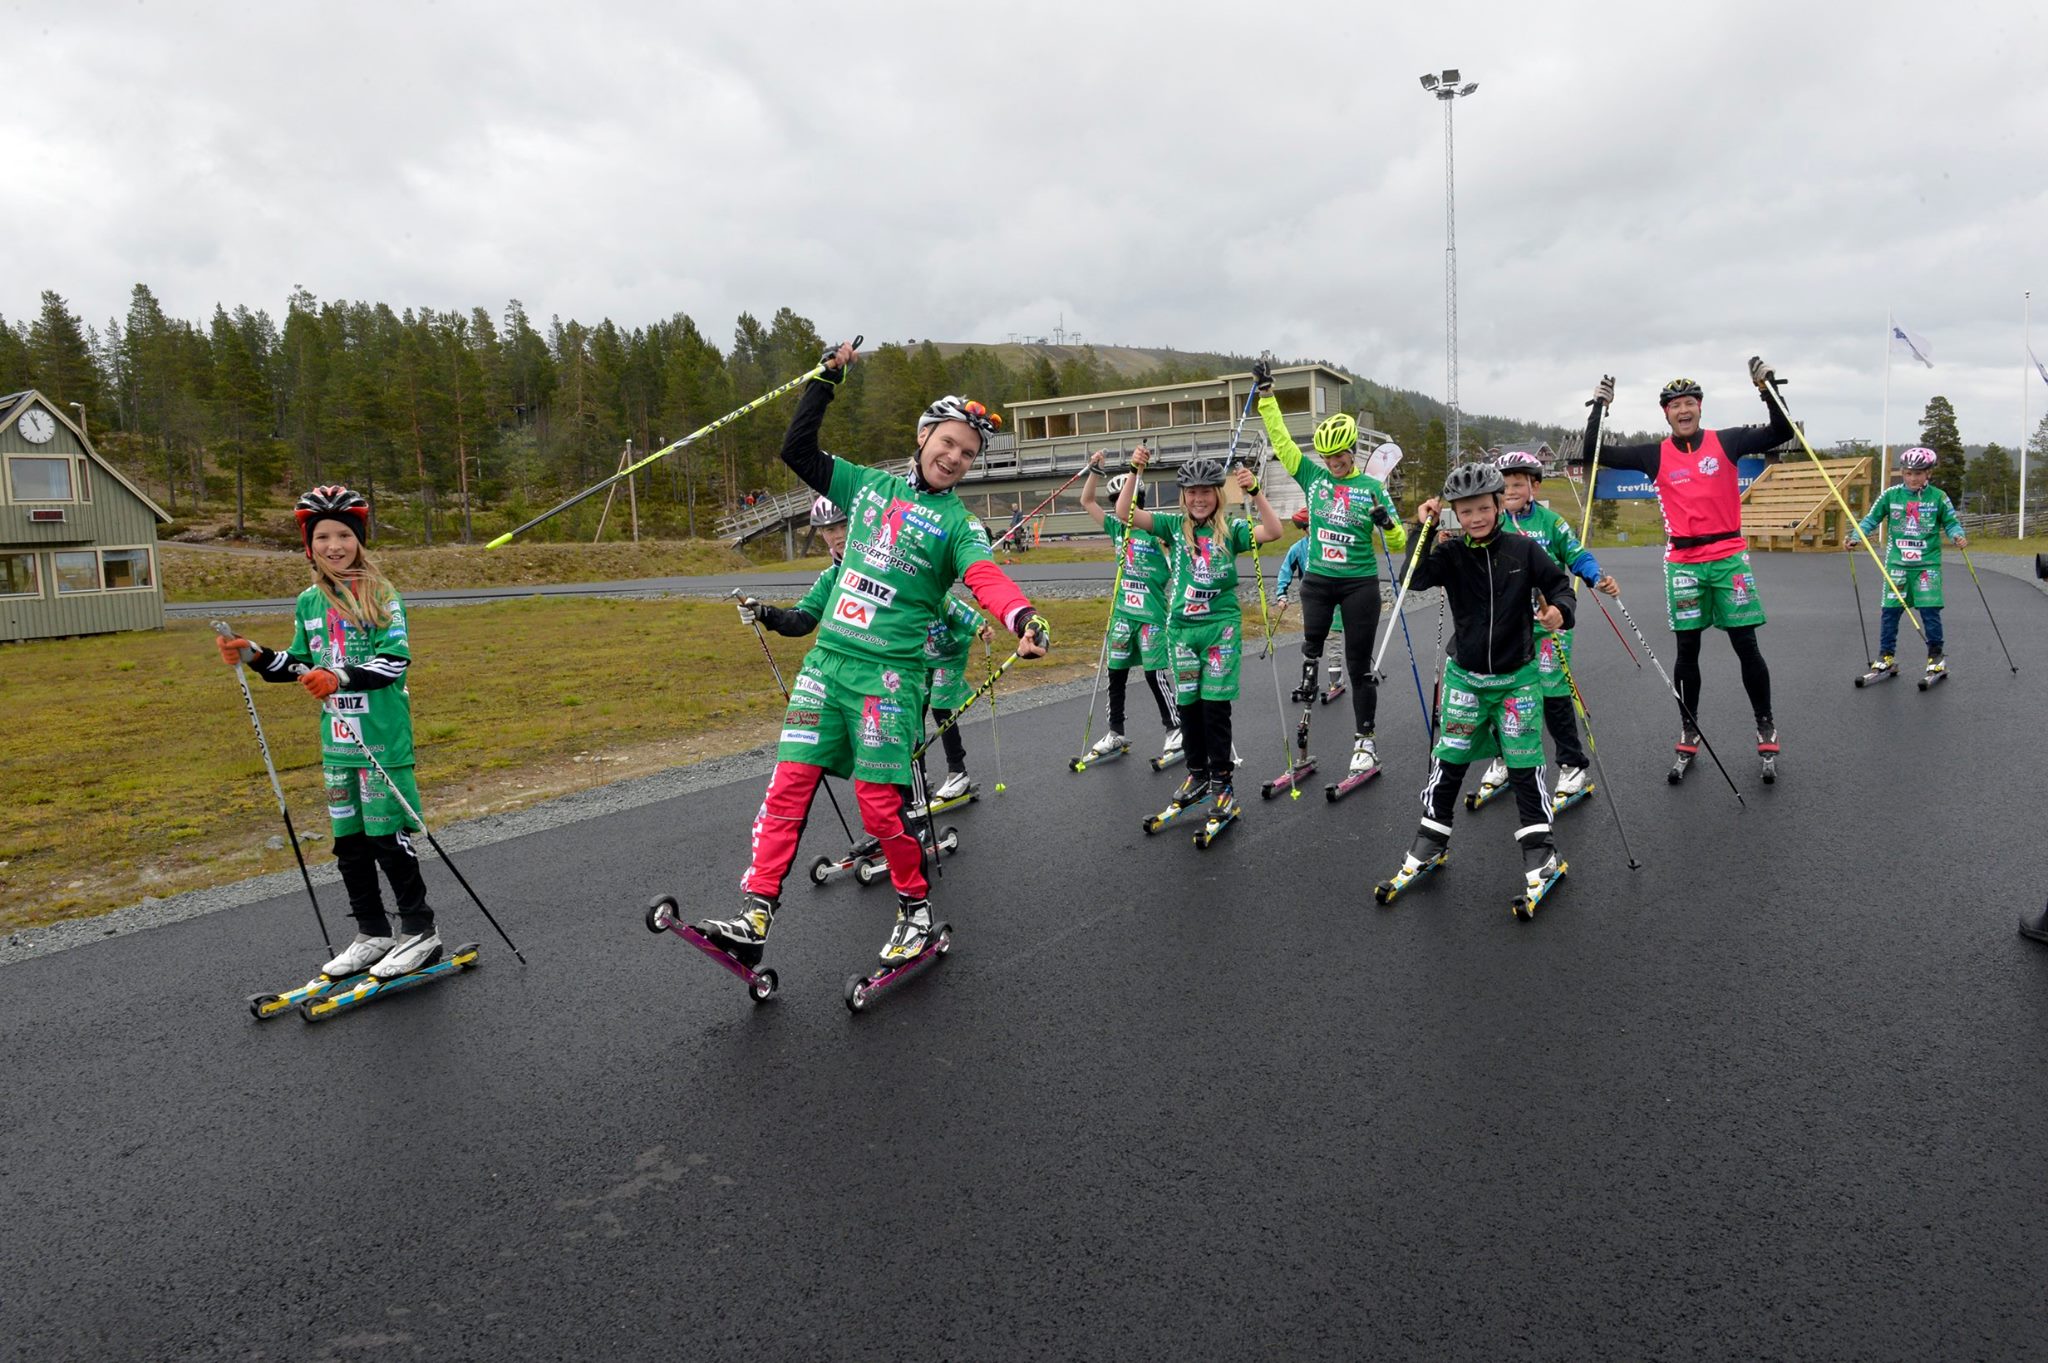 Bryntesson rollerskiing with campers this summertime. Photograph: Staff Robin.